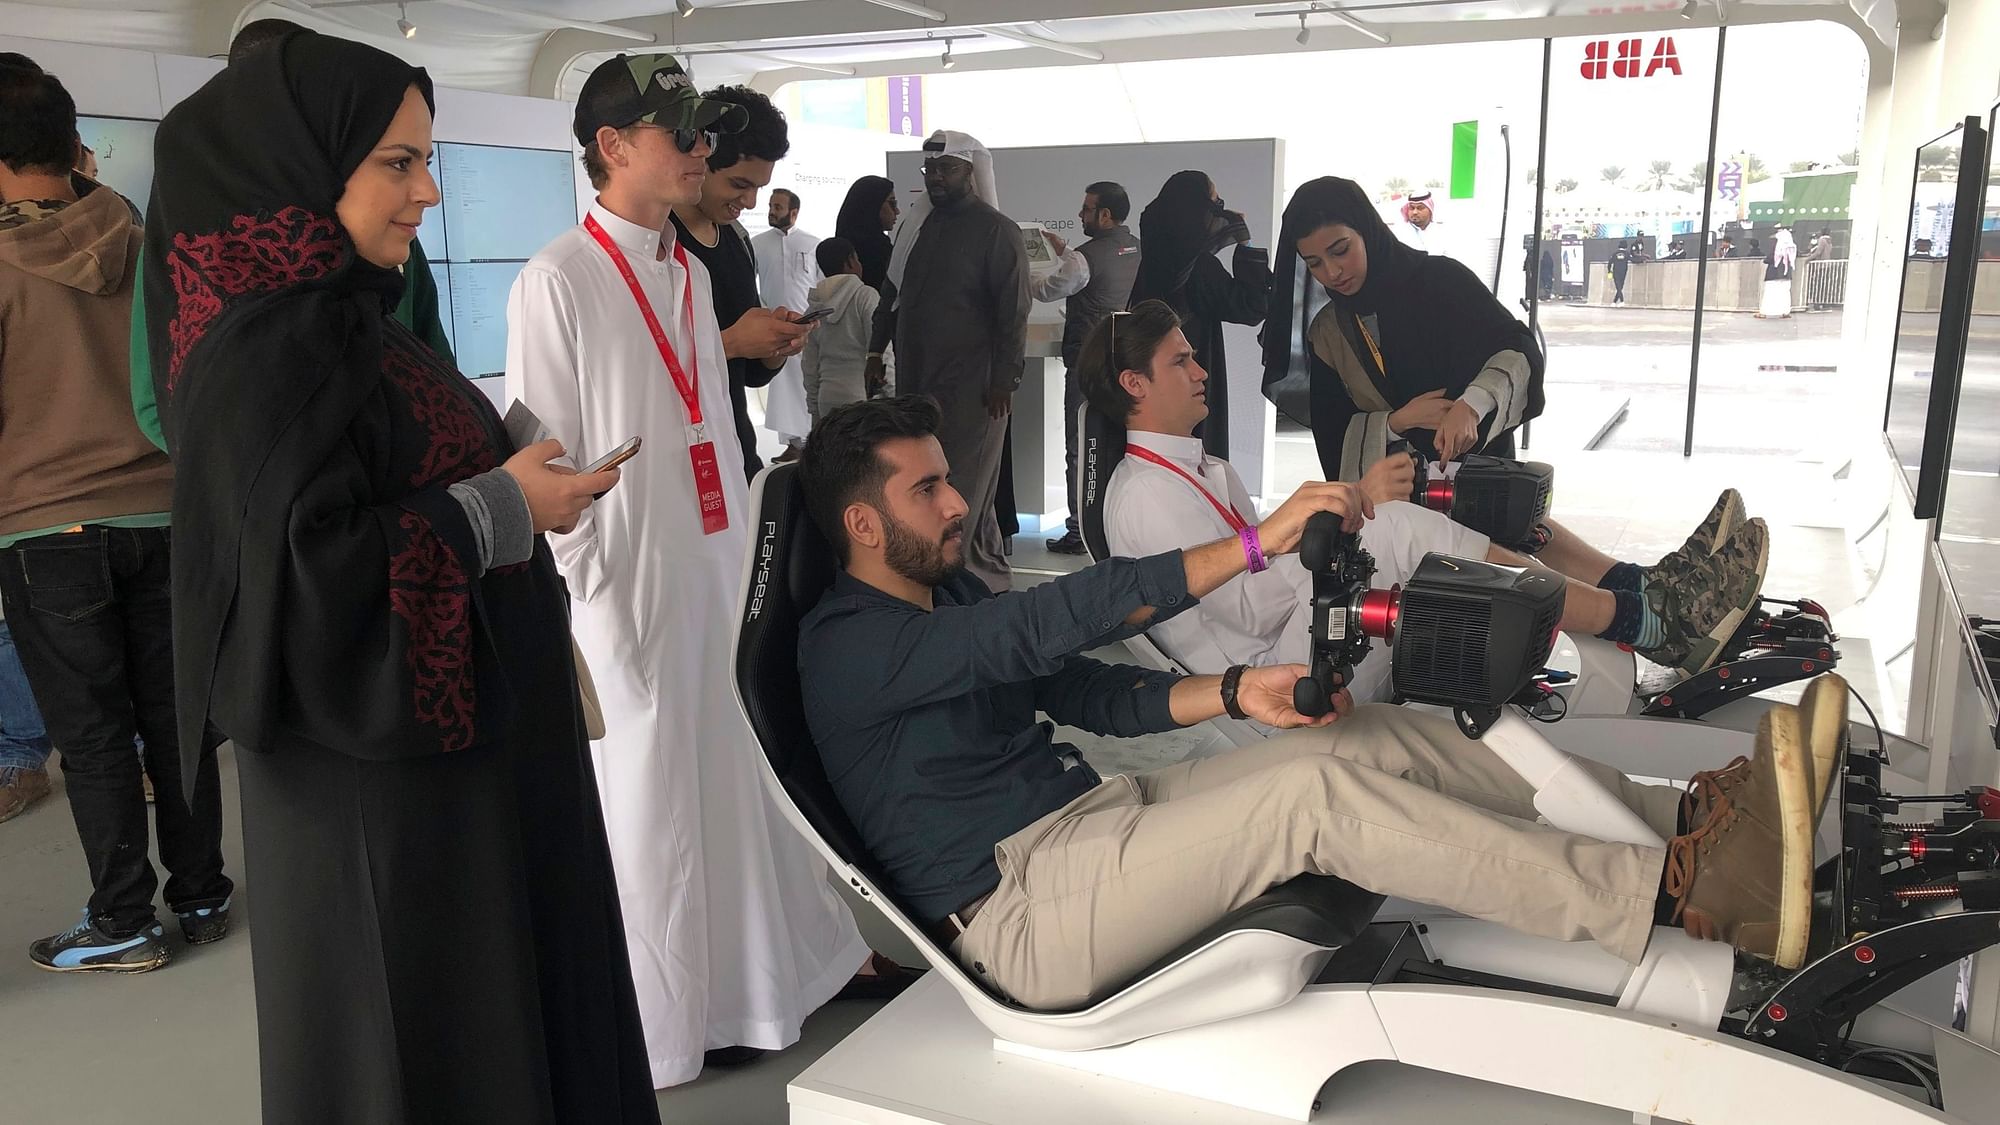 Hostesses in black robes and headscarves give instructions to foreign visitors trying out a simulator at a Formula-E race on the outskirts of Riyadh in Saudi Arabia.